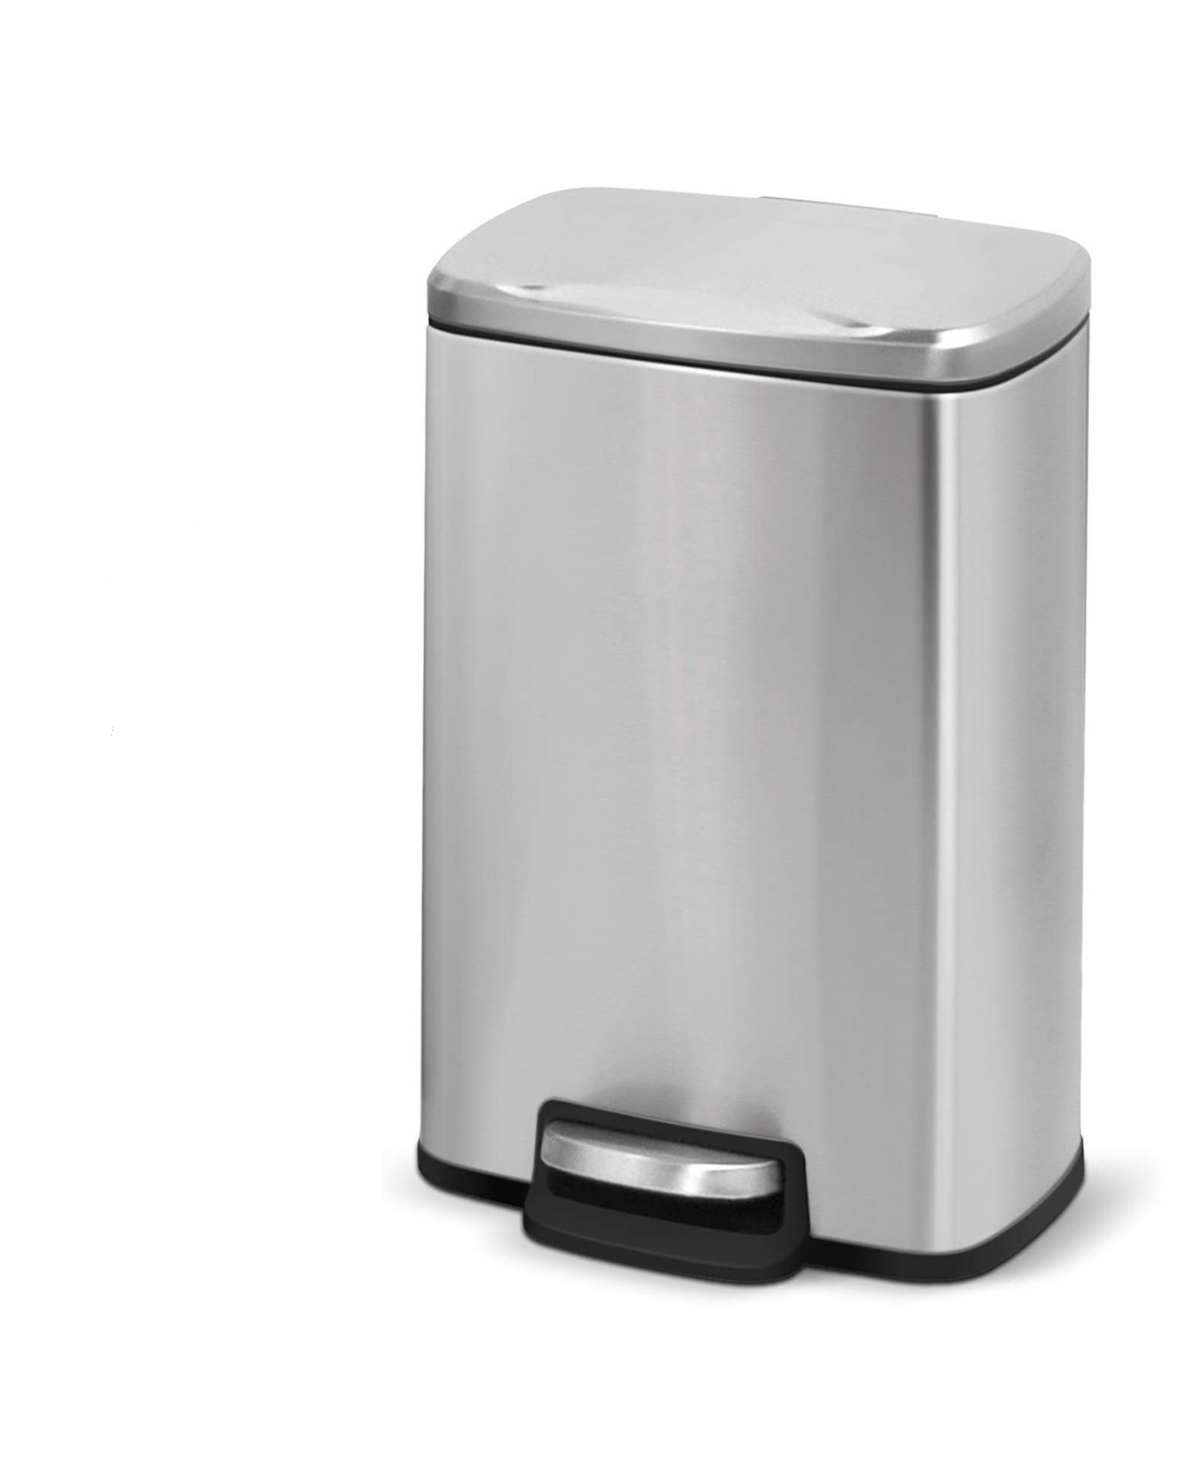 1.3 Gal./5 Liter Rectangular Stainless Steel Step-on Trash Can for Bathroom and Office - Silver